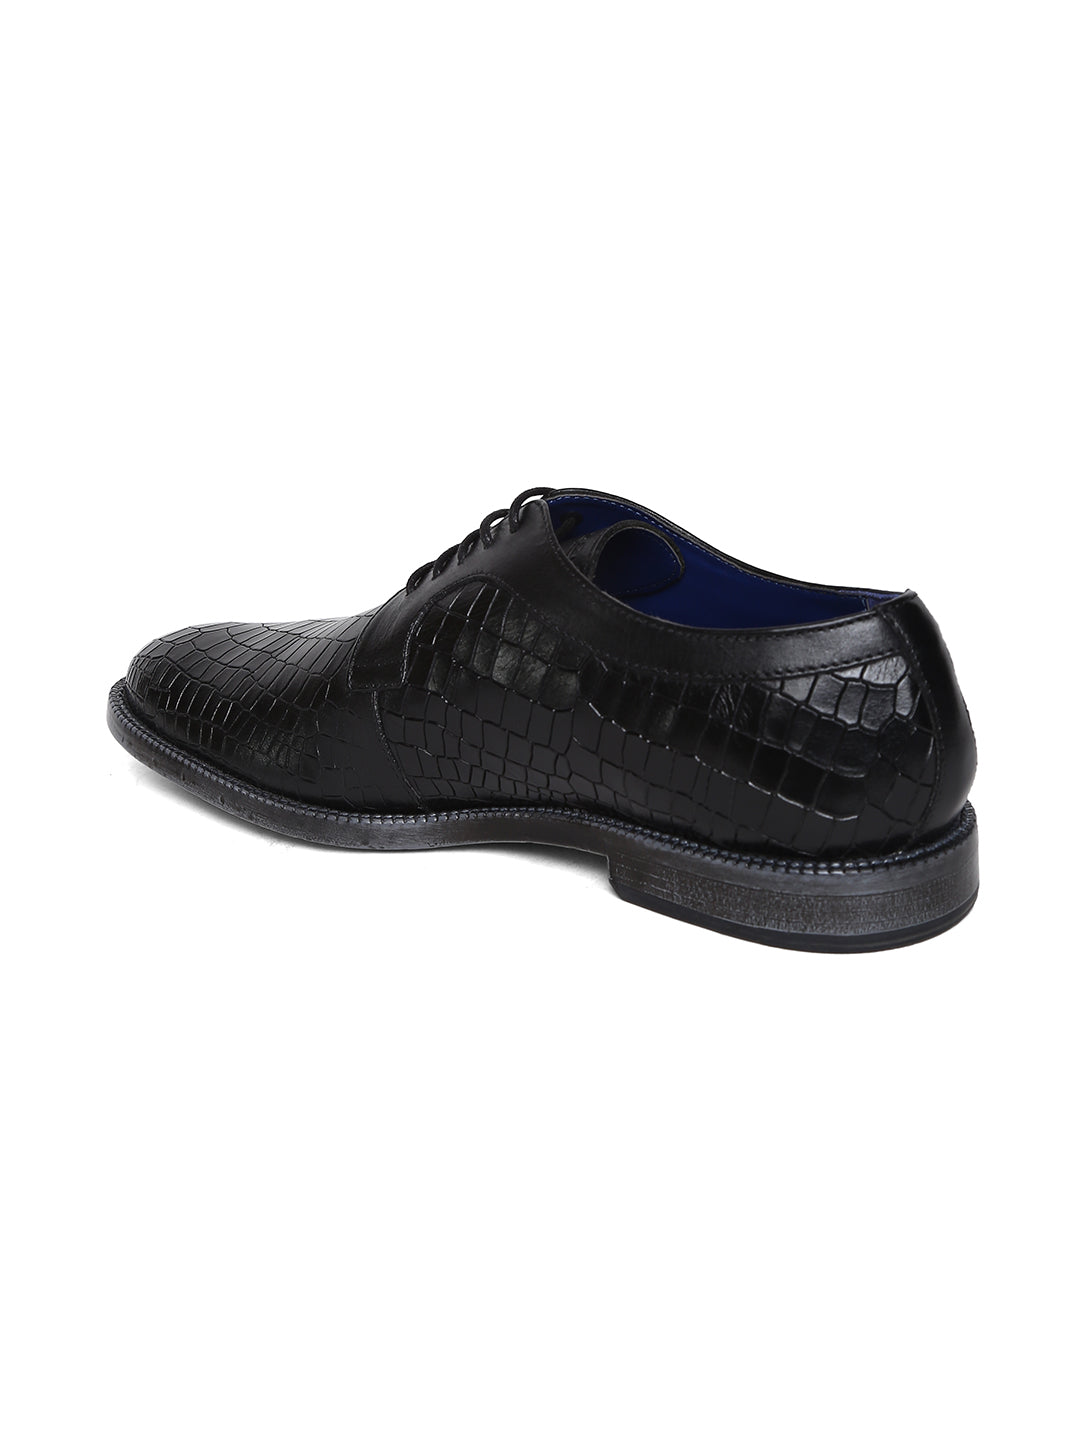 Masabih Genuine Leather Black Printed Casual Derby Laceup Shoes For Men